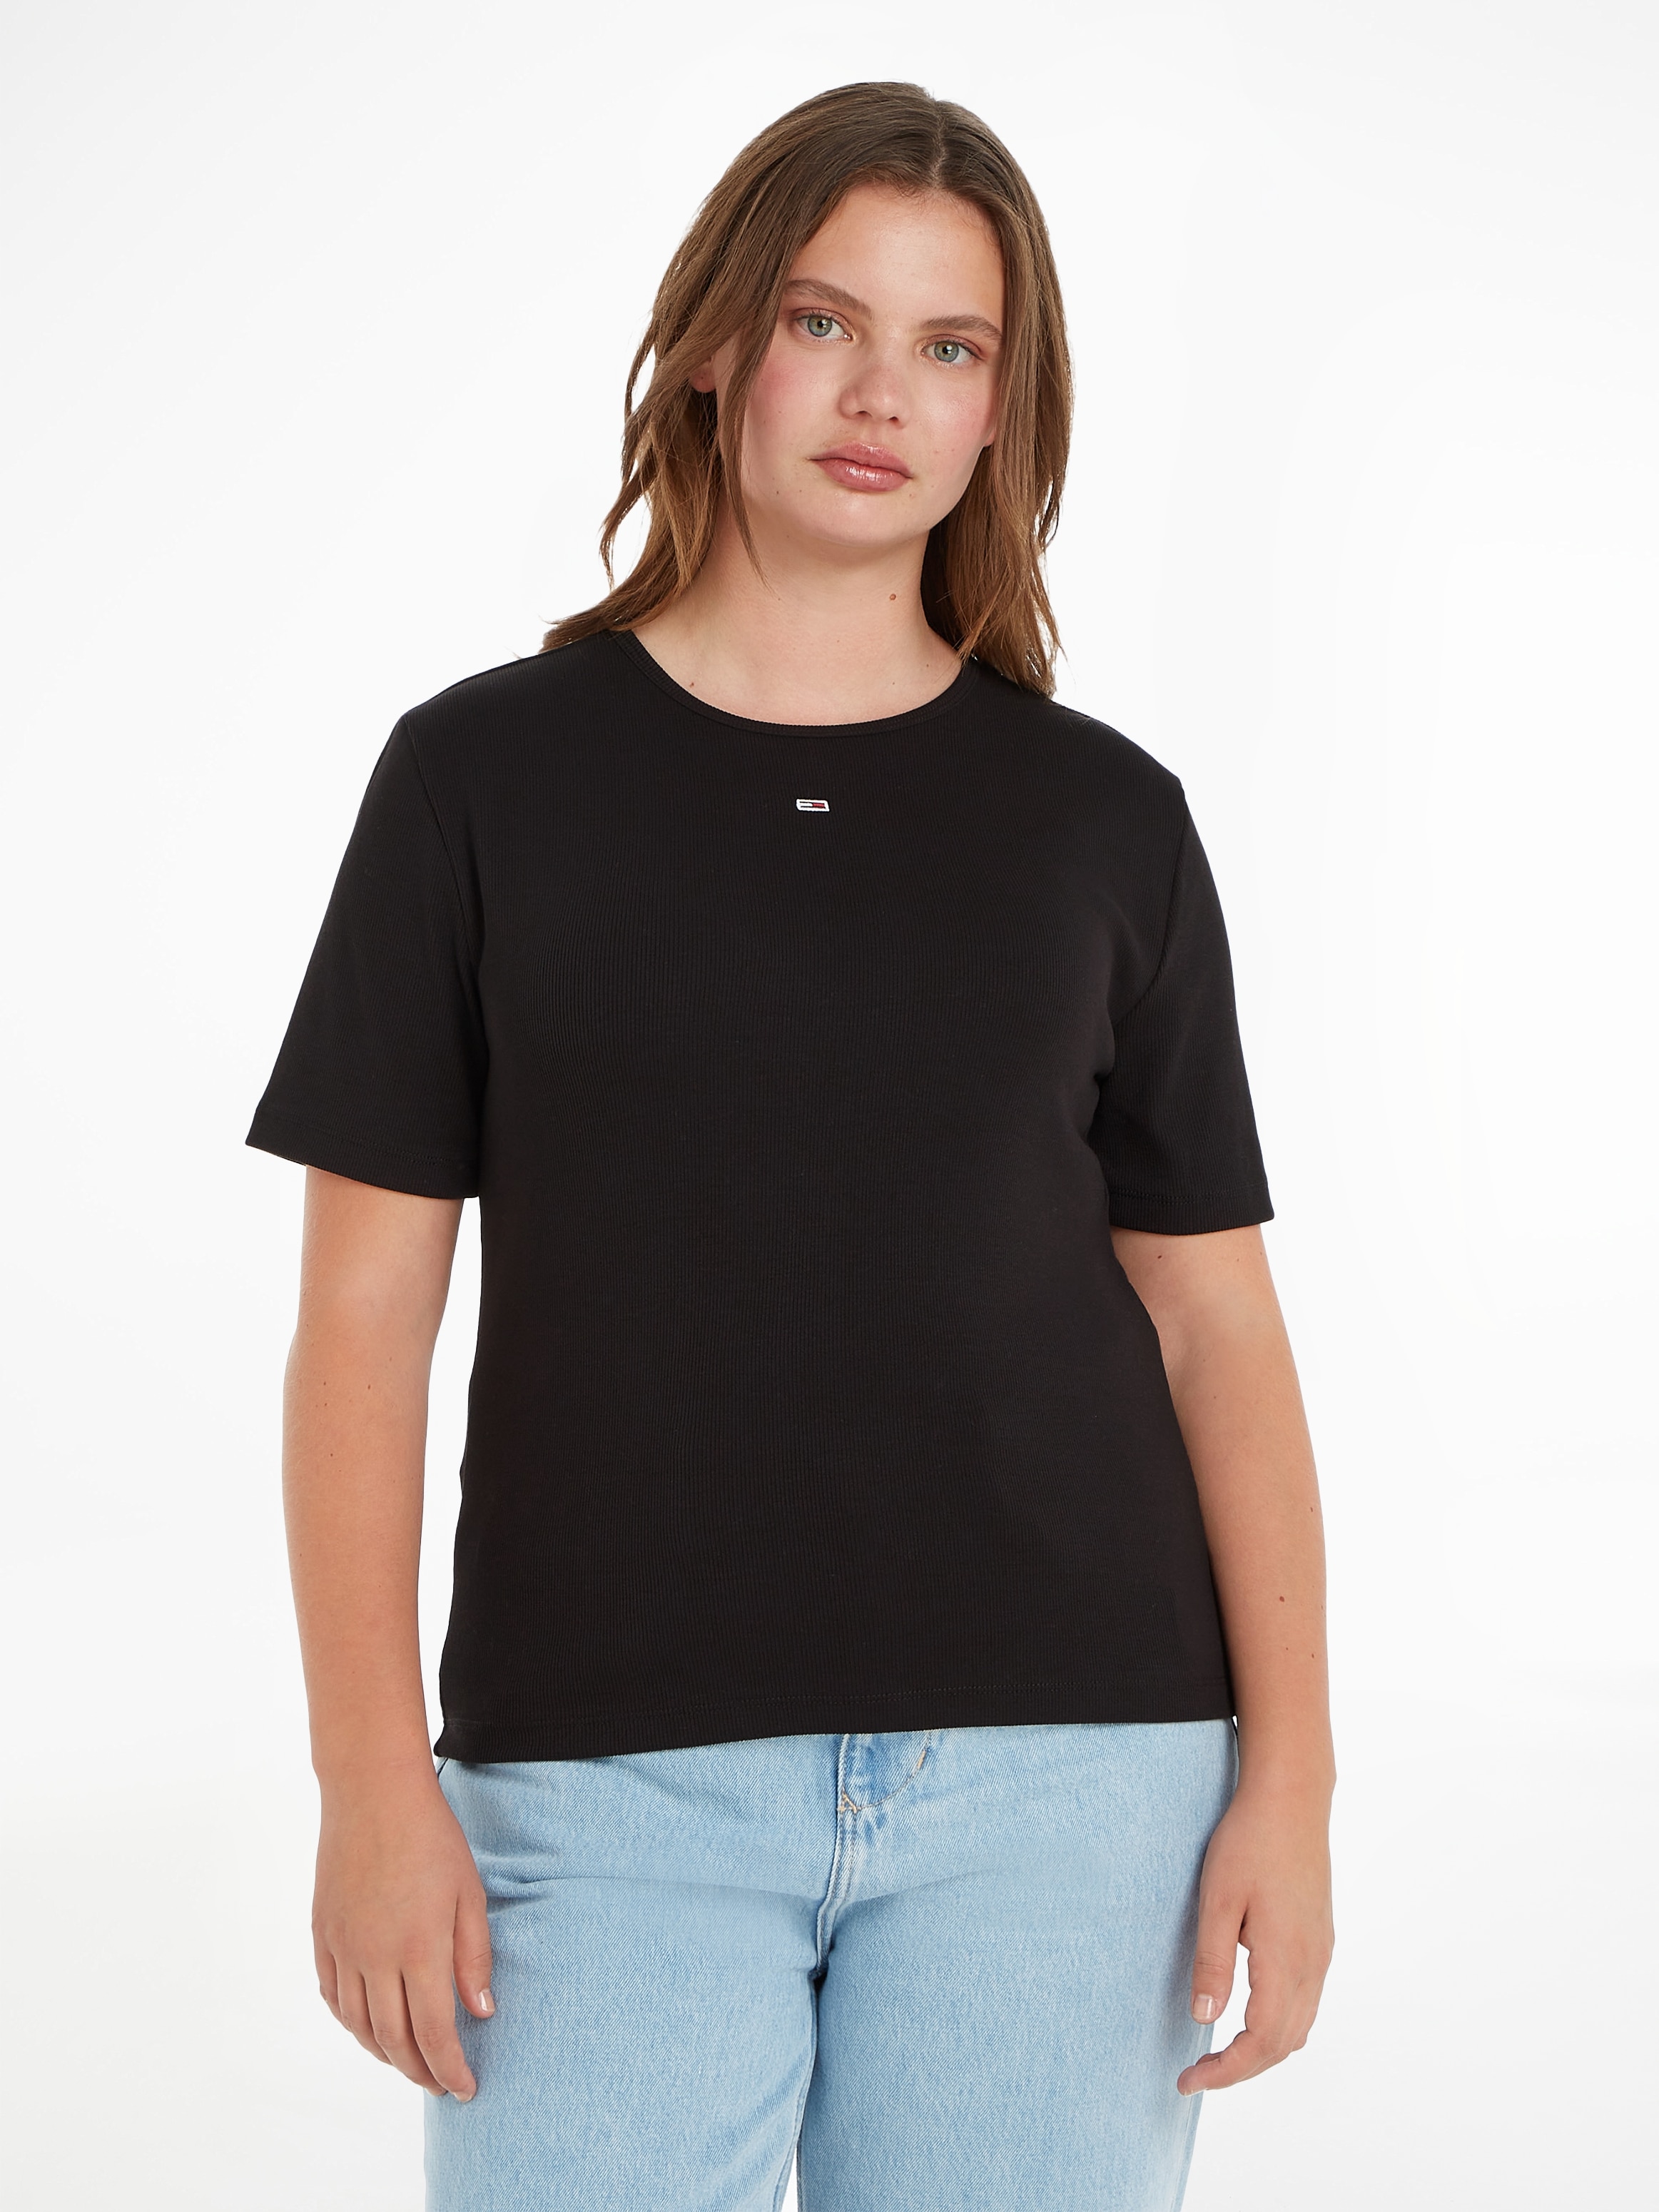 Tommy Jeans Curve Rundhalsshirt »TJW CRV bei CURVE,mit BBY tlg.), OTTOversand SIZE ESSENTIAL Jeans-Logostickerei PLUS SS«, Tommy (1 RIB